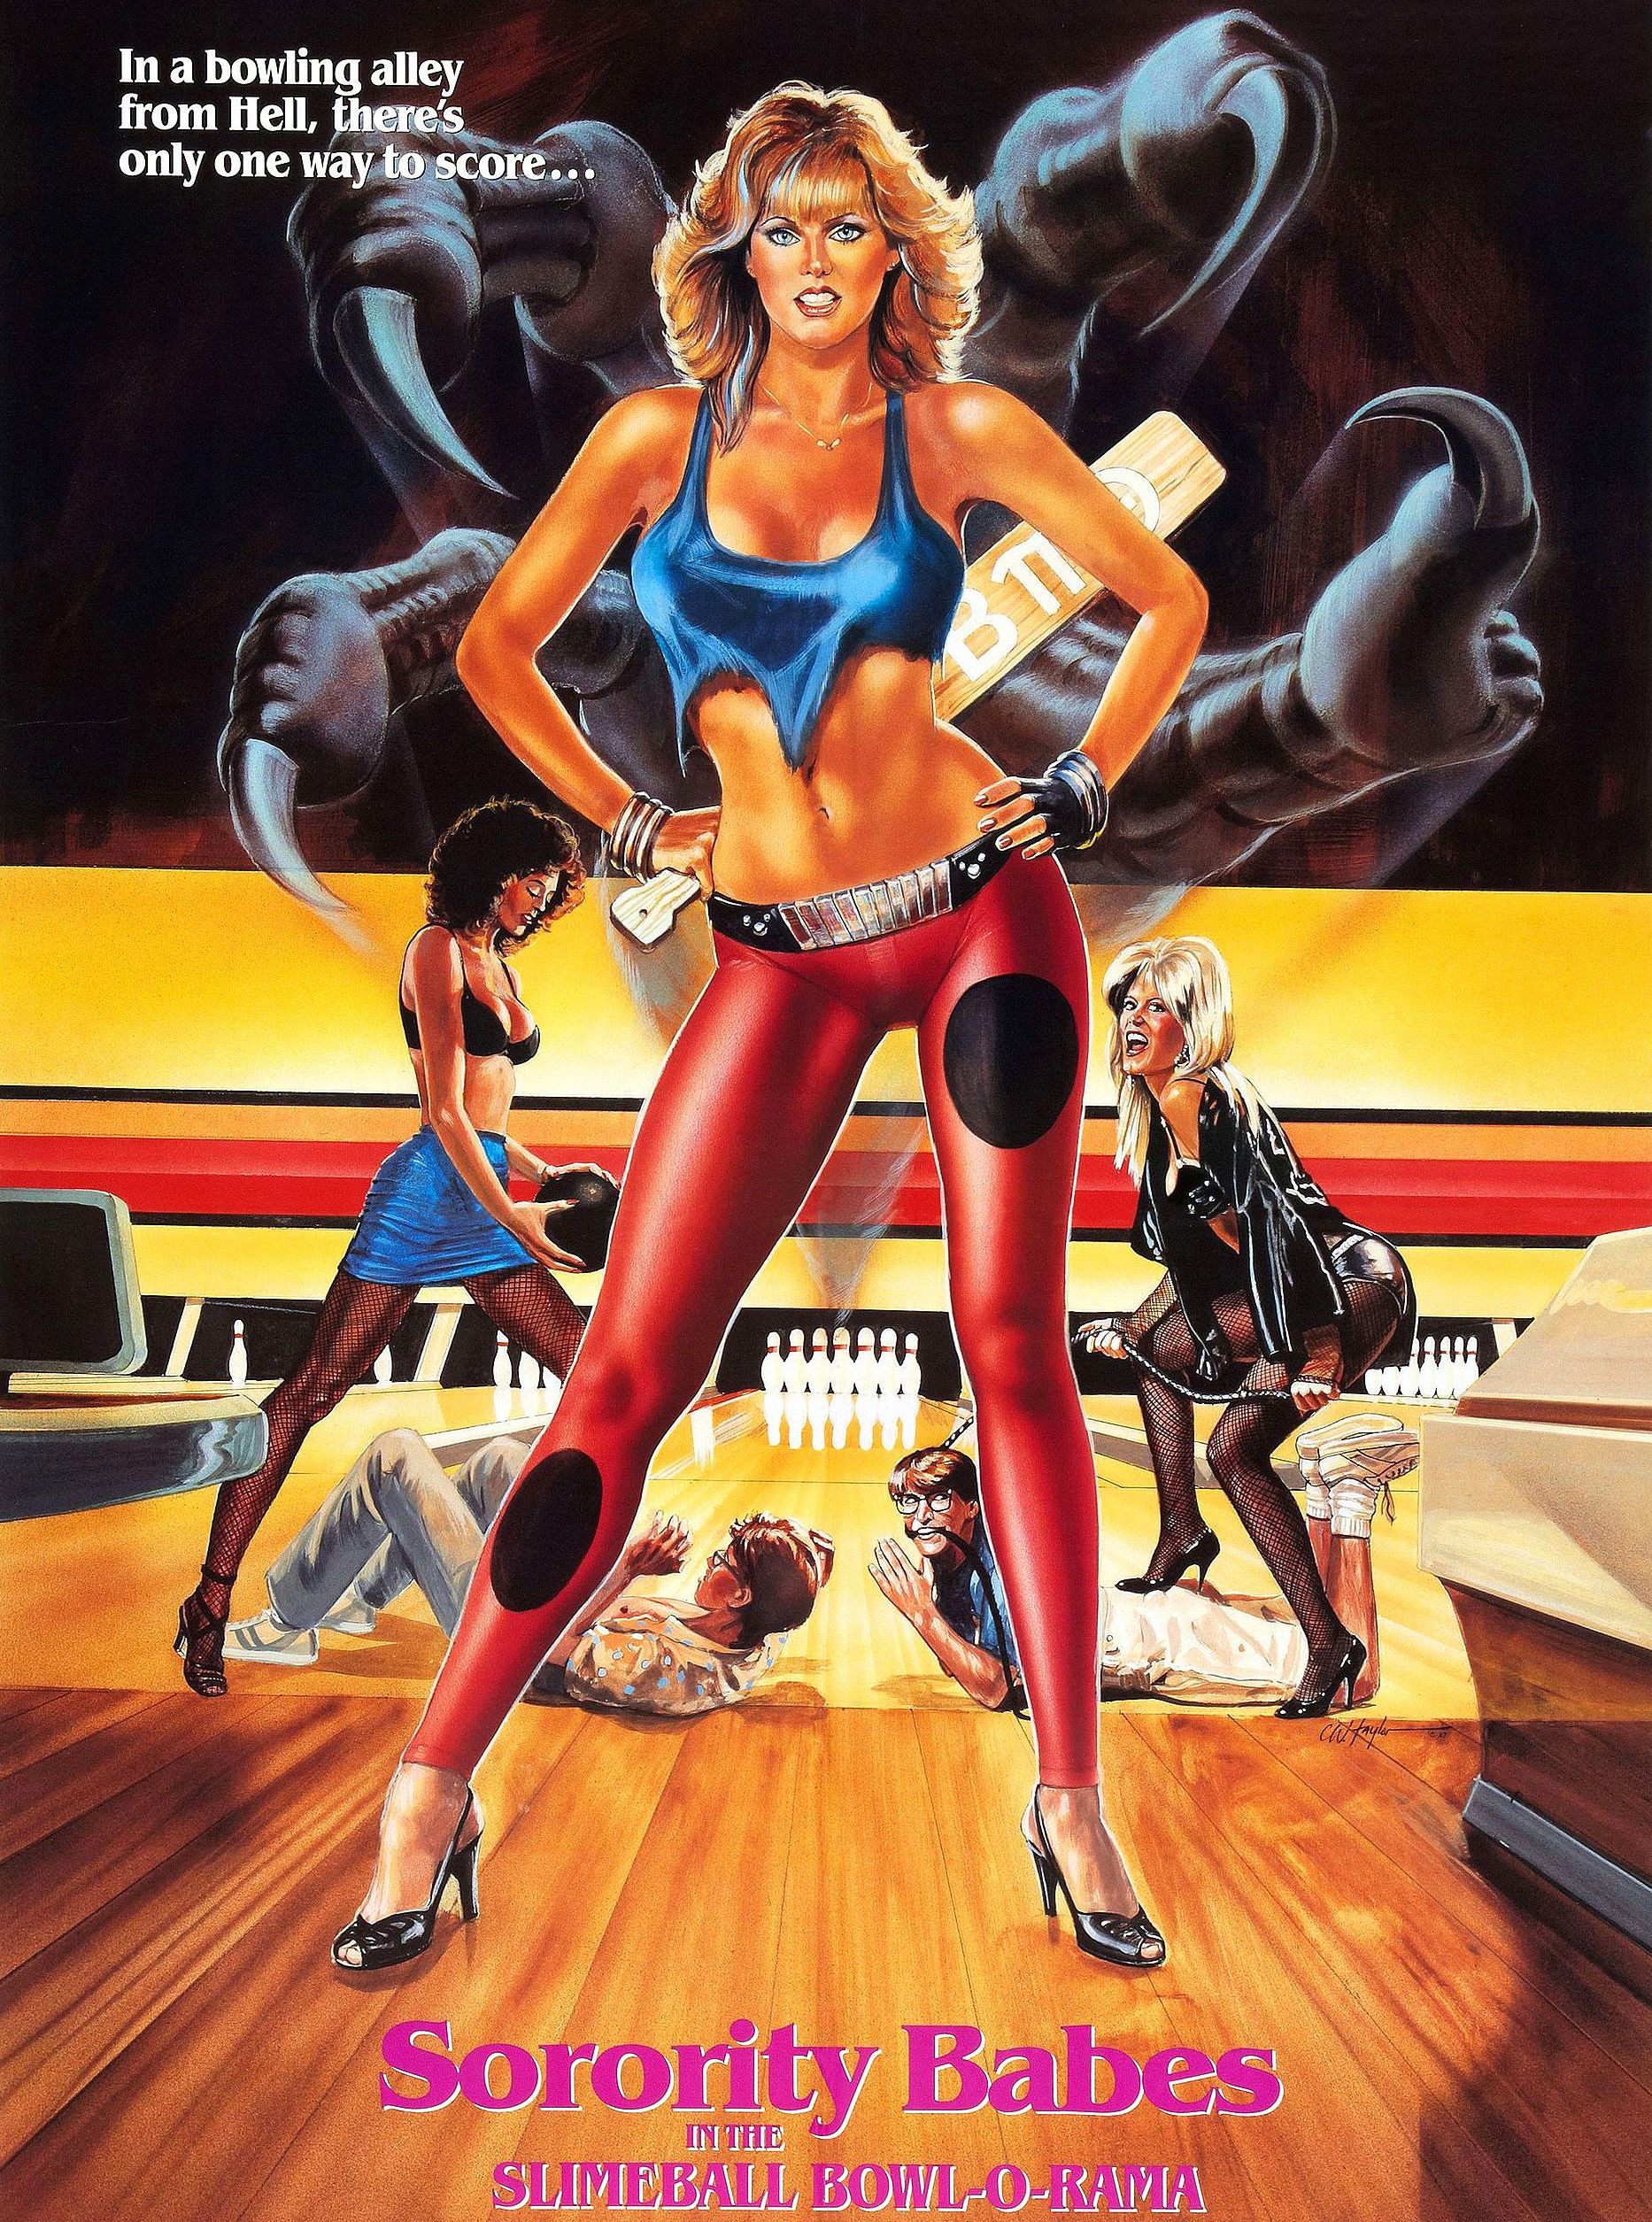 Sorority Babes In The Slimeball Bowl-A-Rama (movie poster)